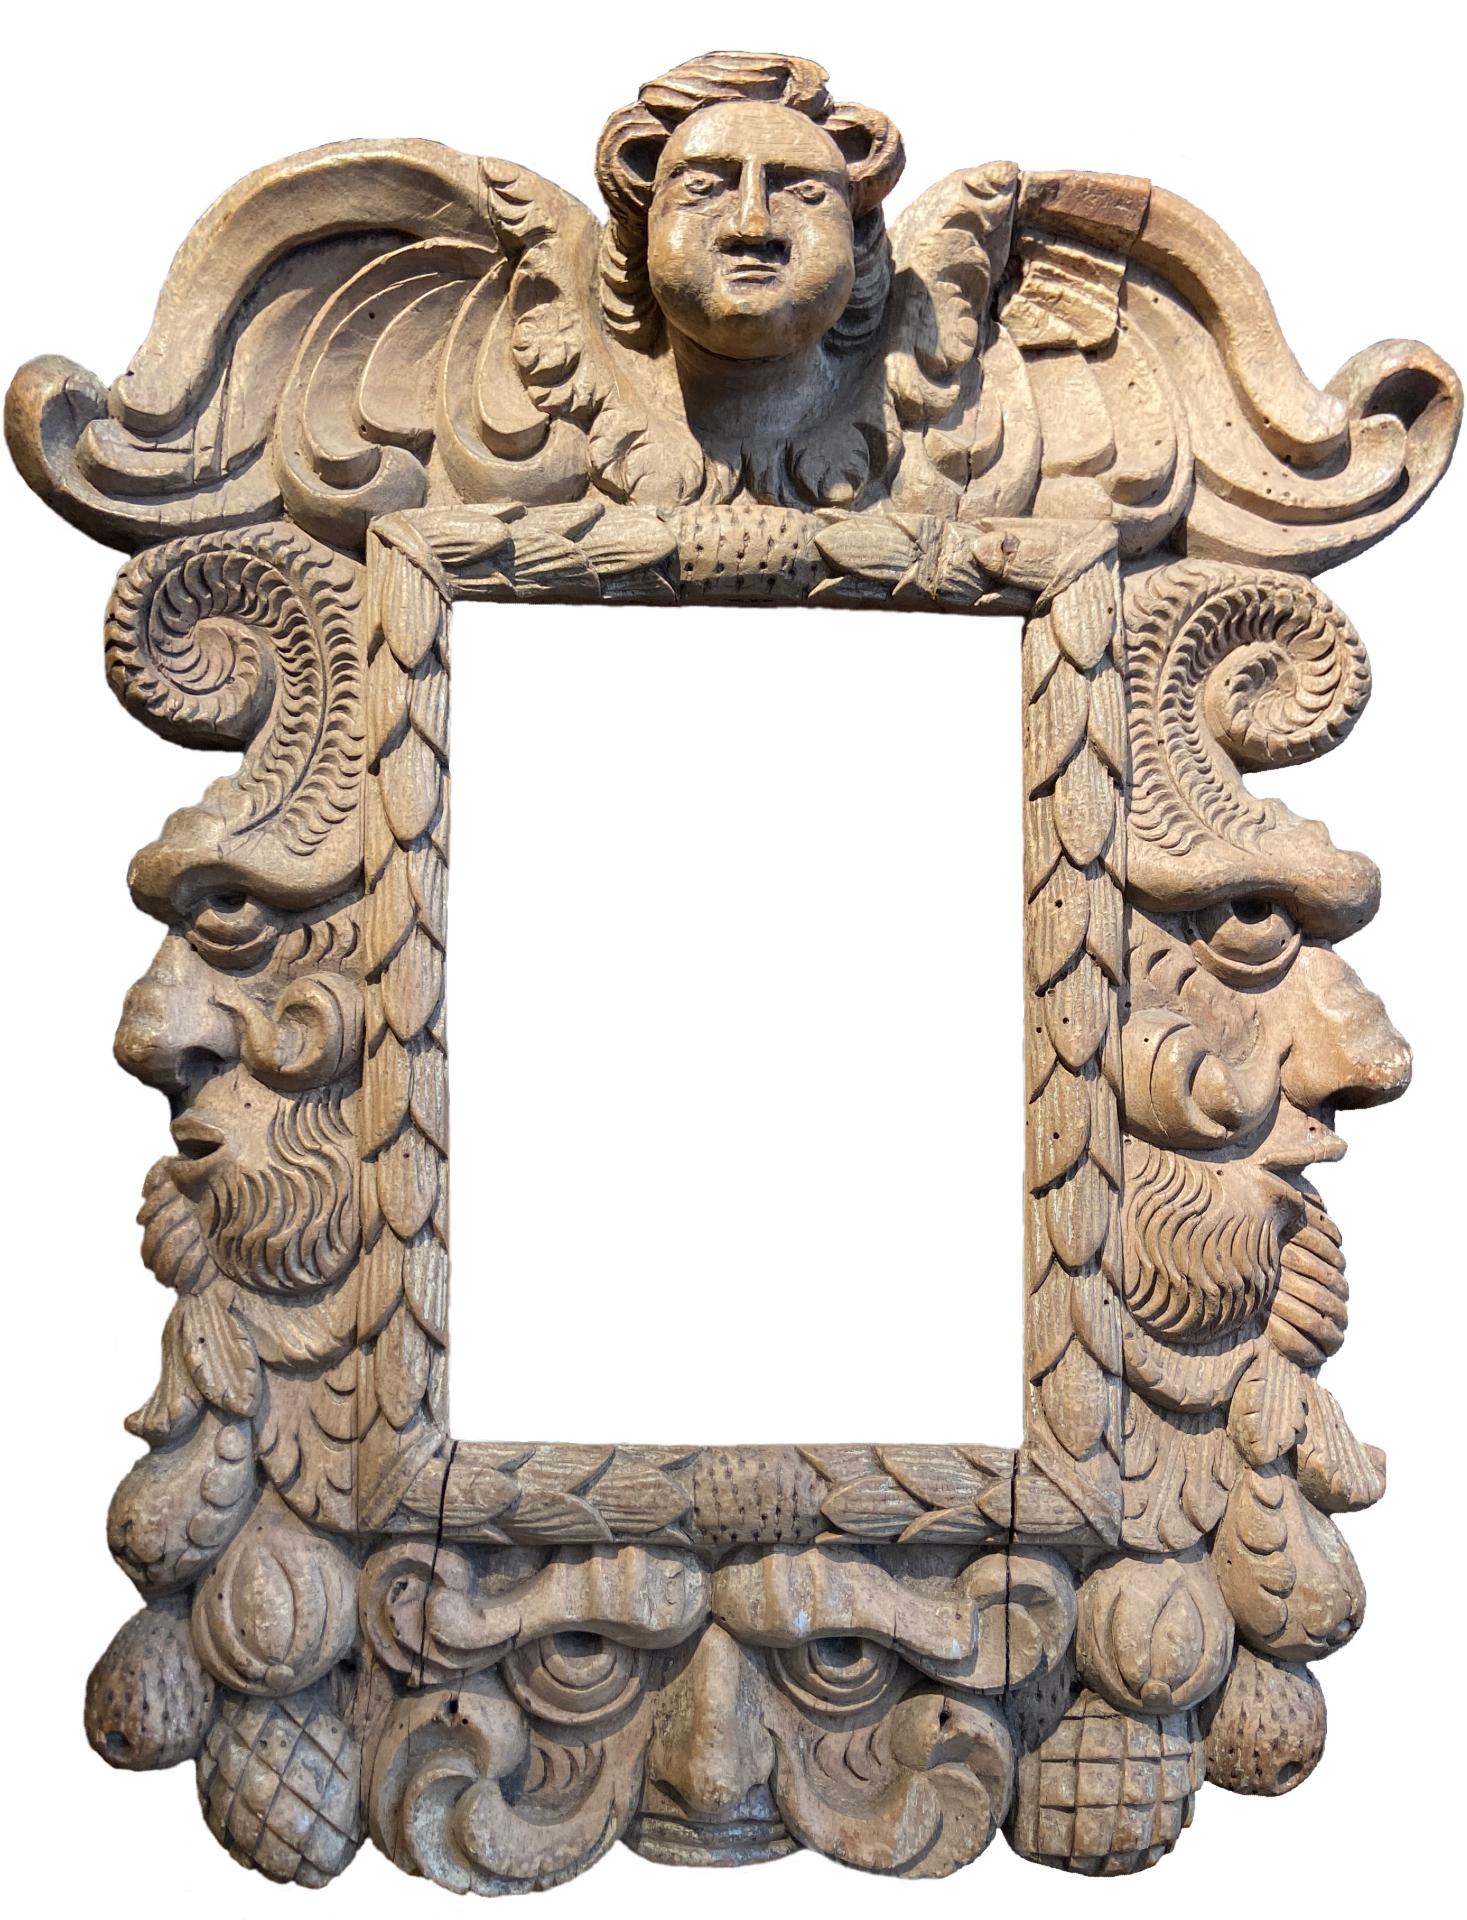 Hand Carved Fruit Wood
Length: 16 inches (40.5 inches)

A striking, richly hand carved frame in high relief. It shows a rich decor of natural organic forms alongside a collection of characterful faces. On the upper part of the frame is a putto on a